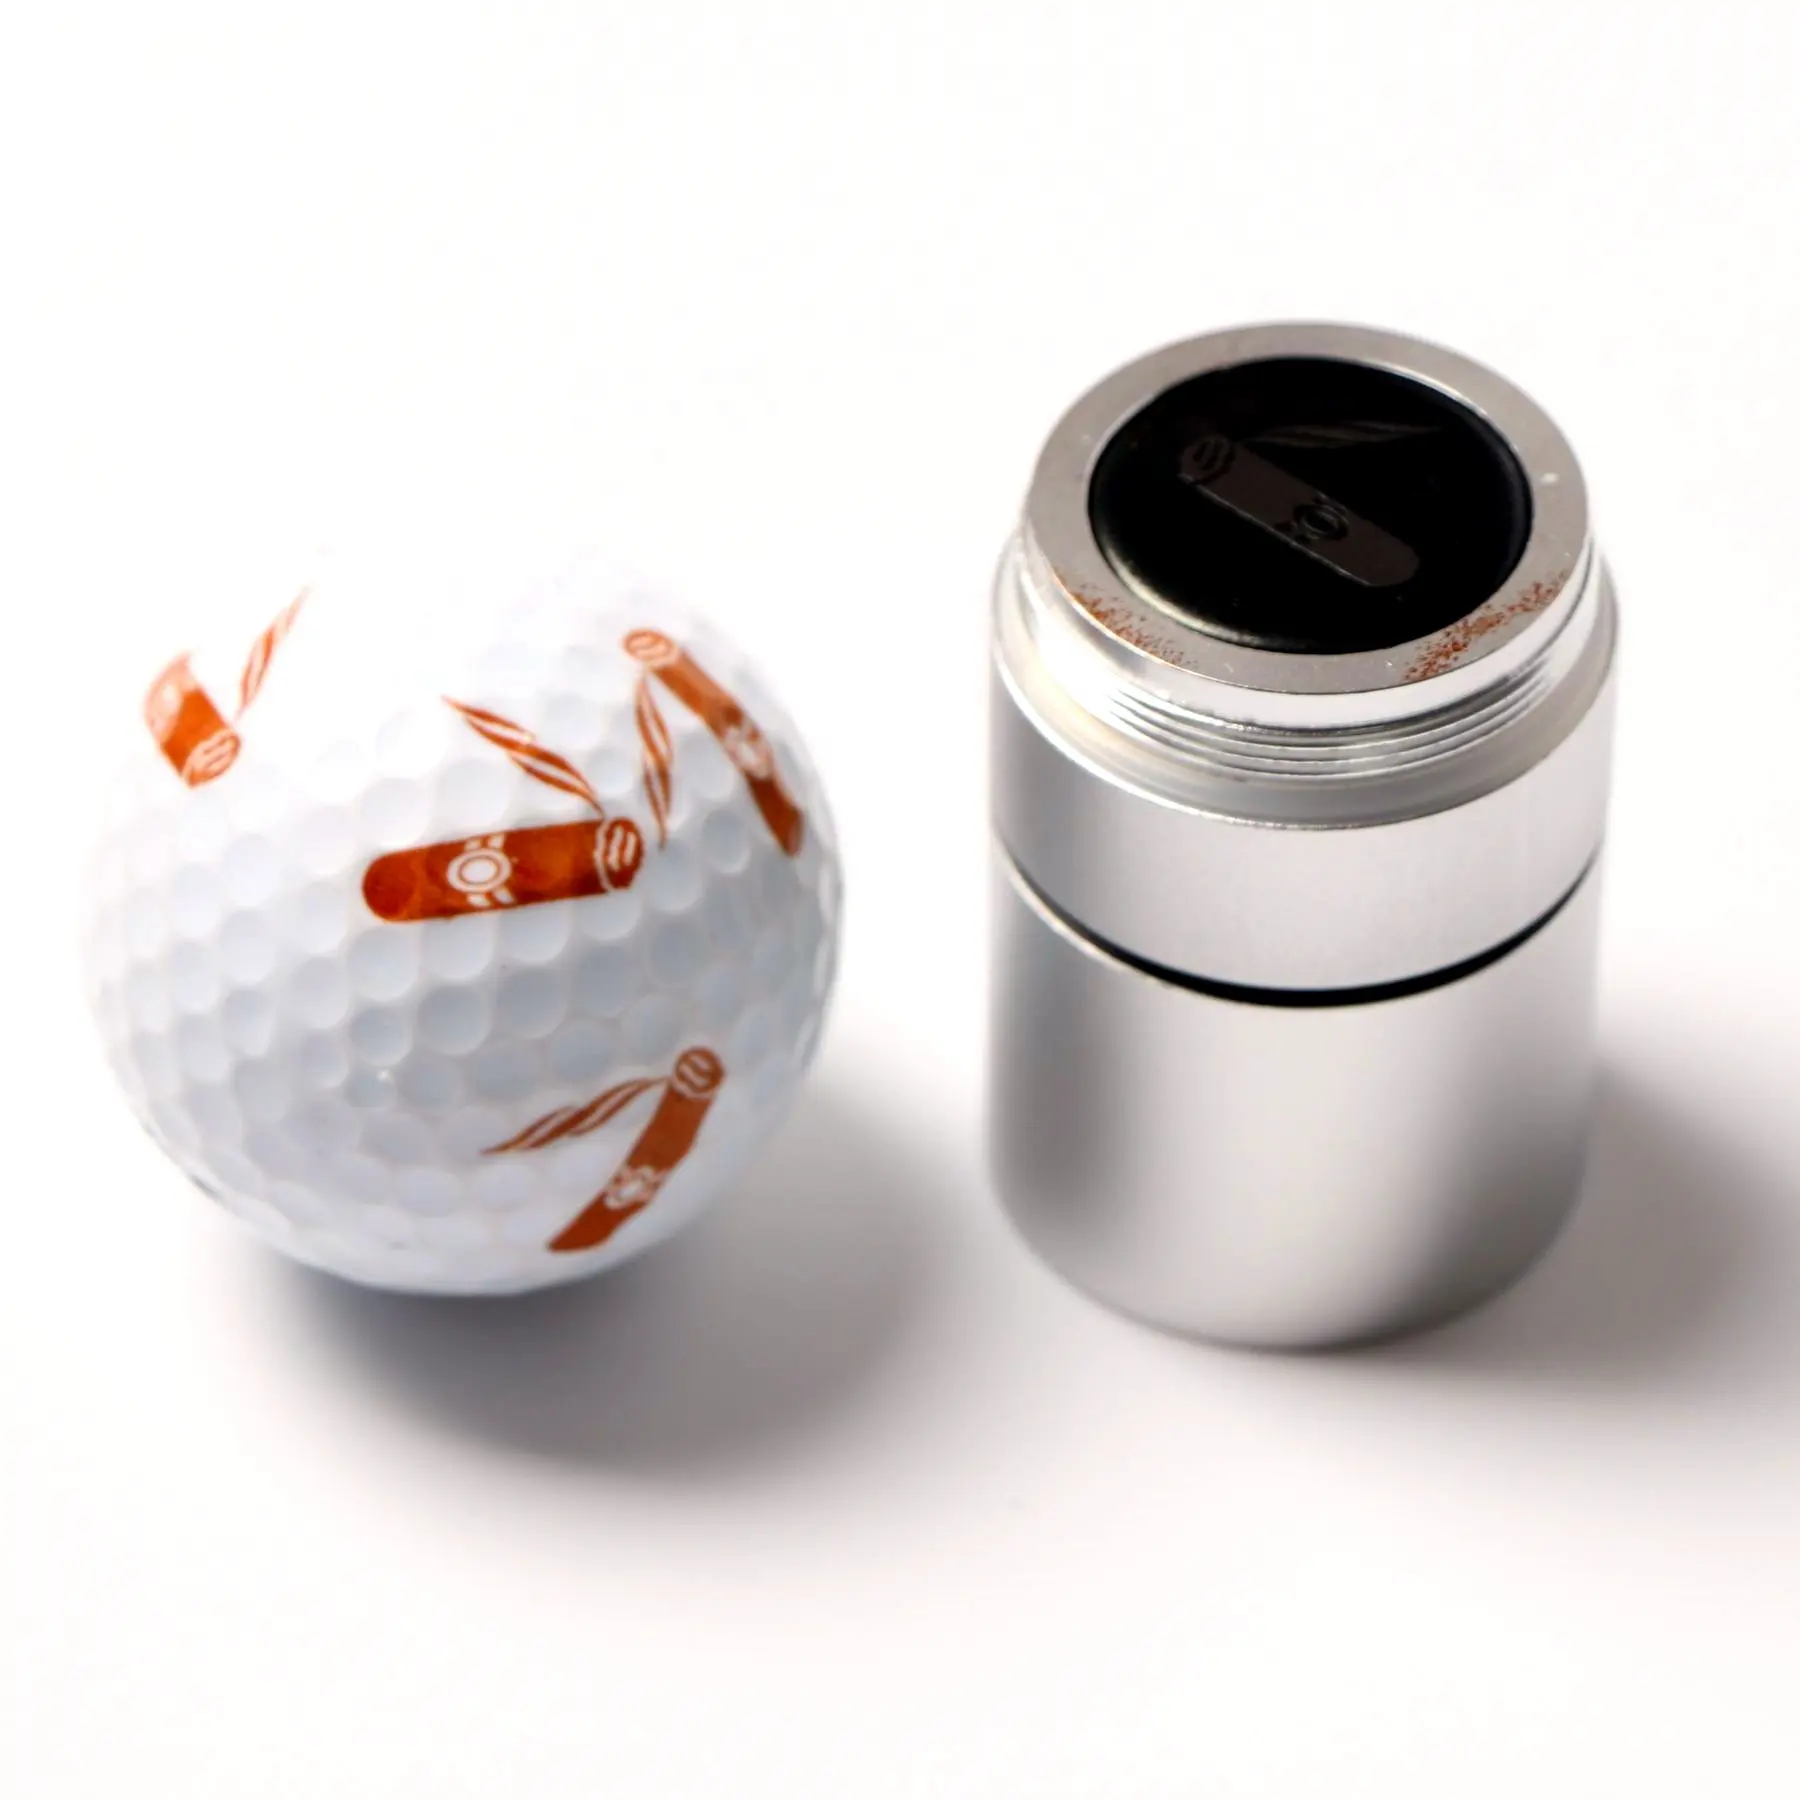 Customizable large mark aluminum Golf Ball Stamps Dia.20mm to make large mark on your balls